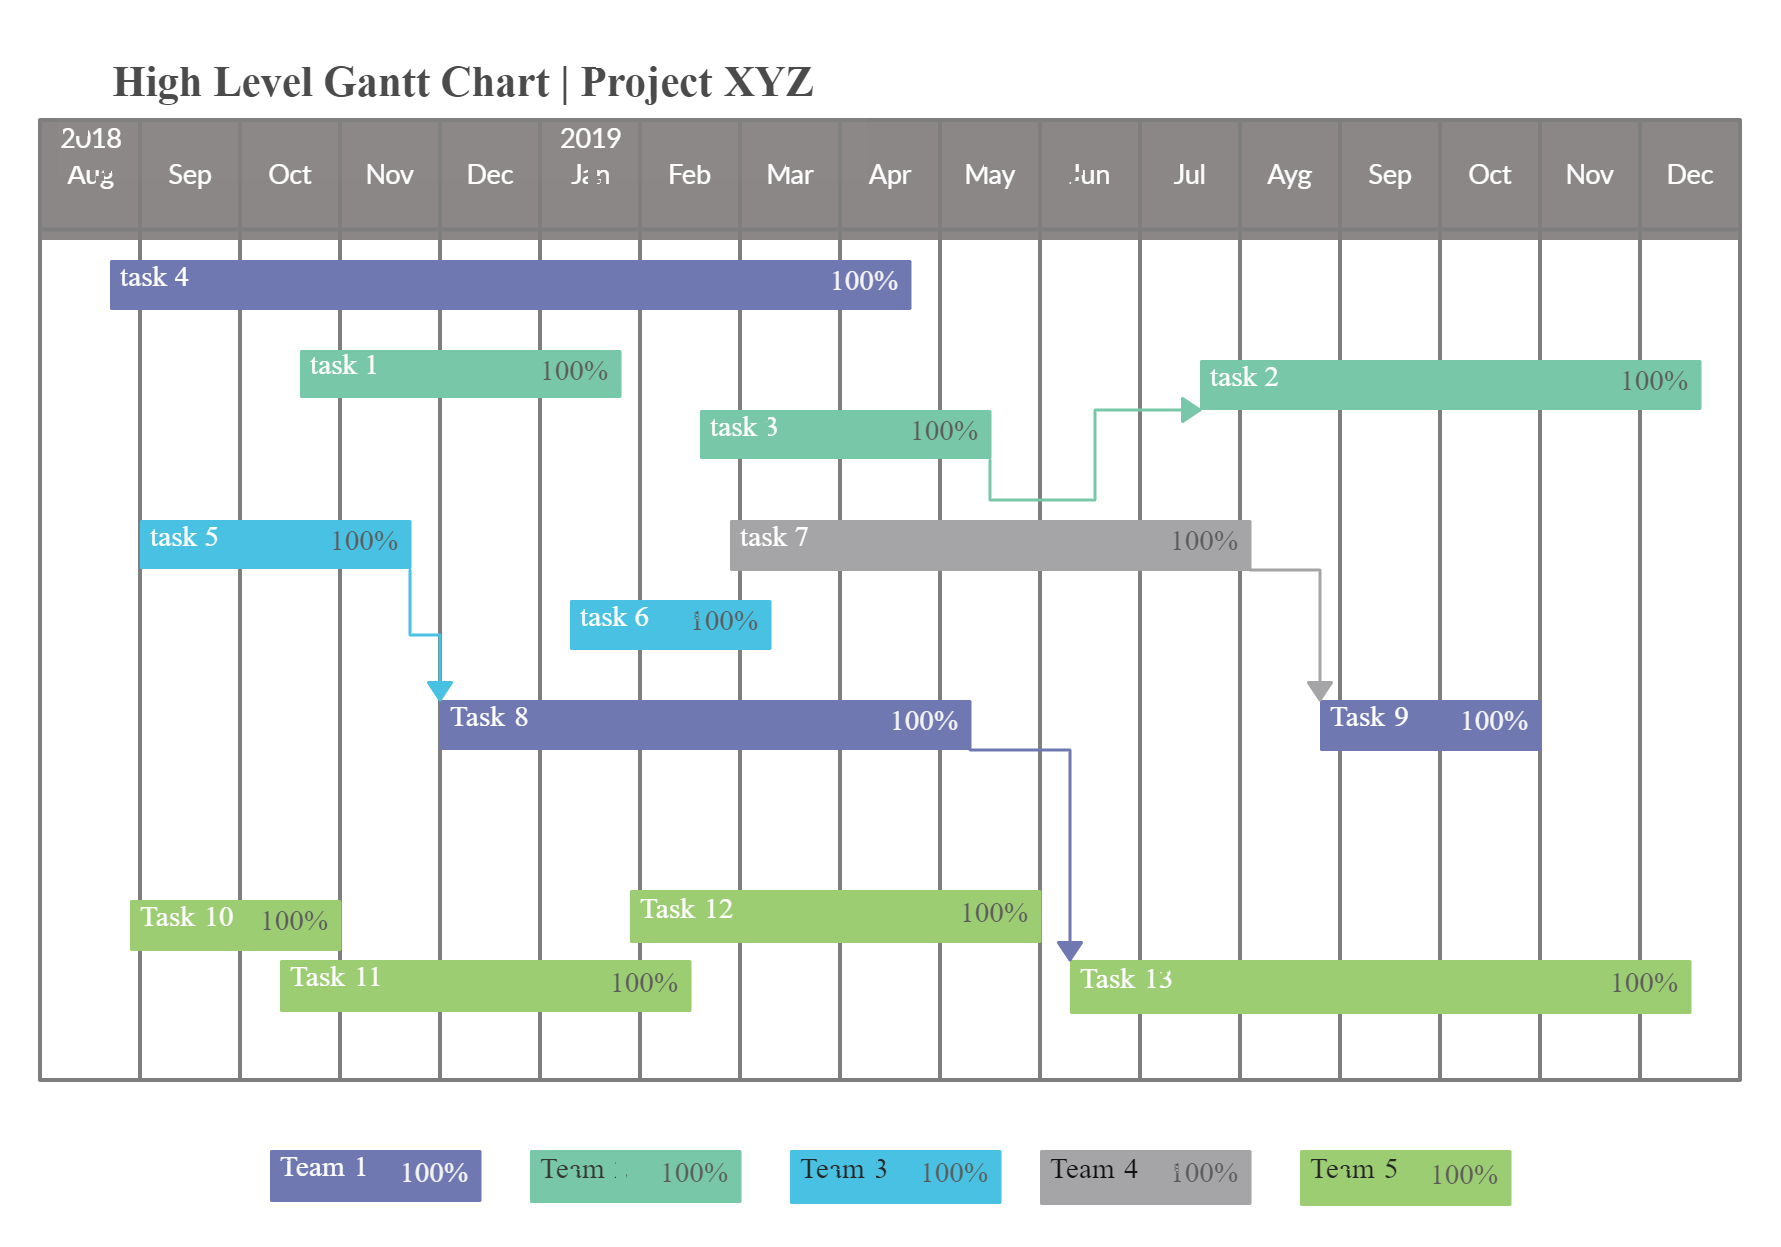 5 Reasons To Use Gantt Charts For Project Management And Other Tasks 9375